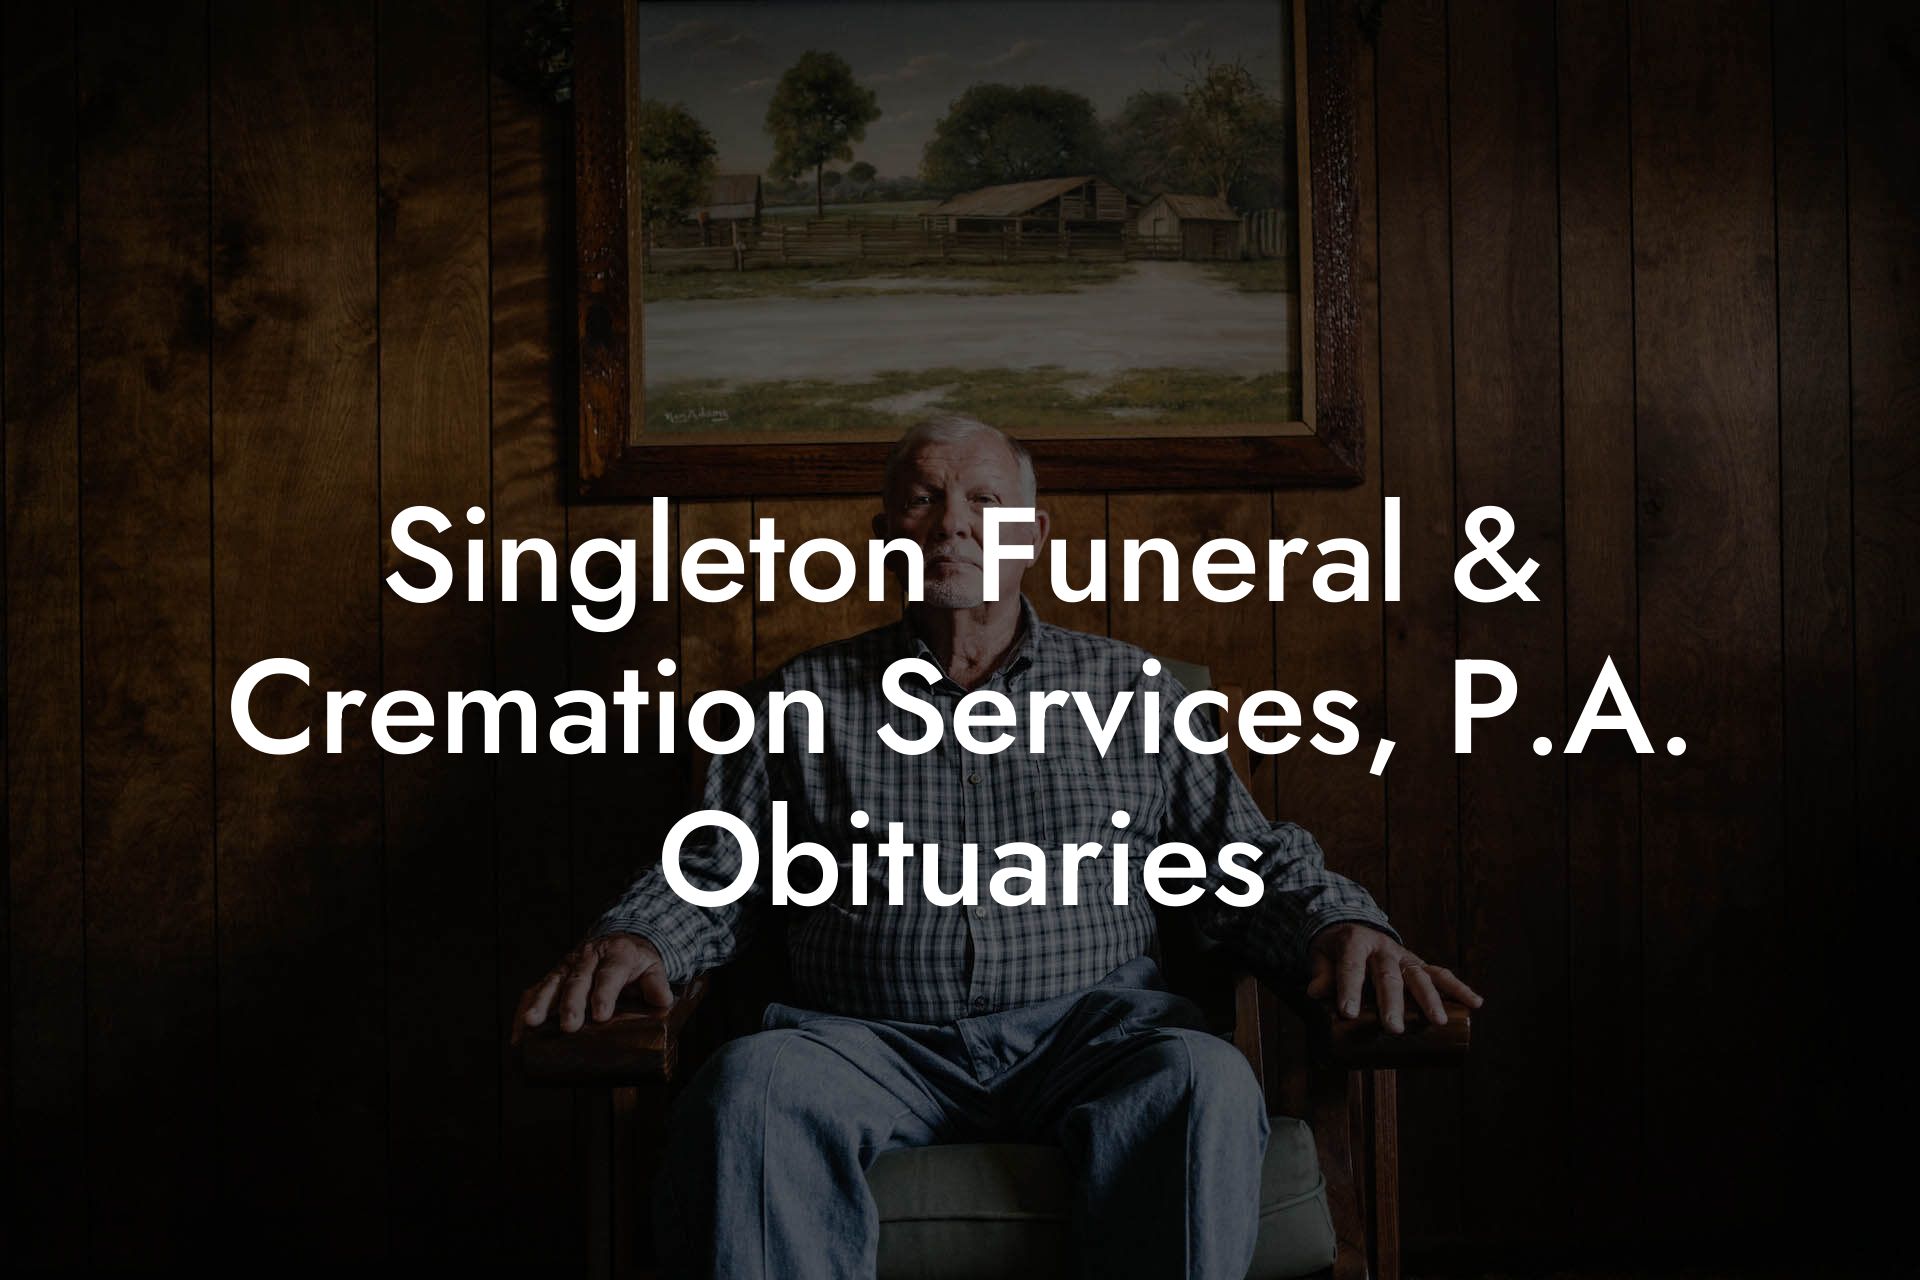 Singleton Funeral & Cremation Services, P.A. Obituaries